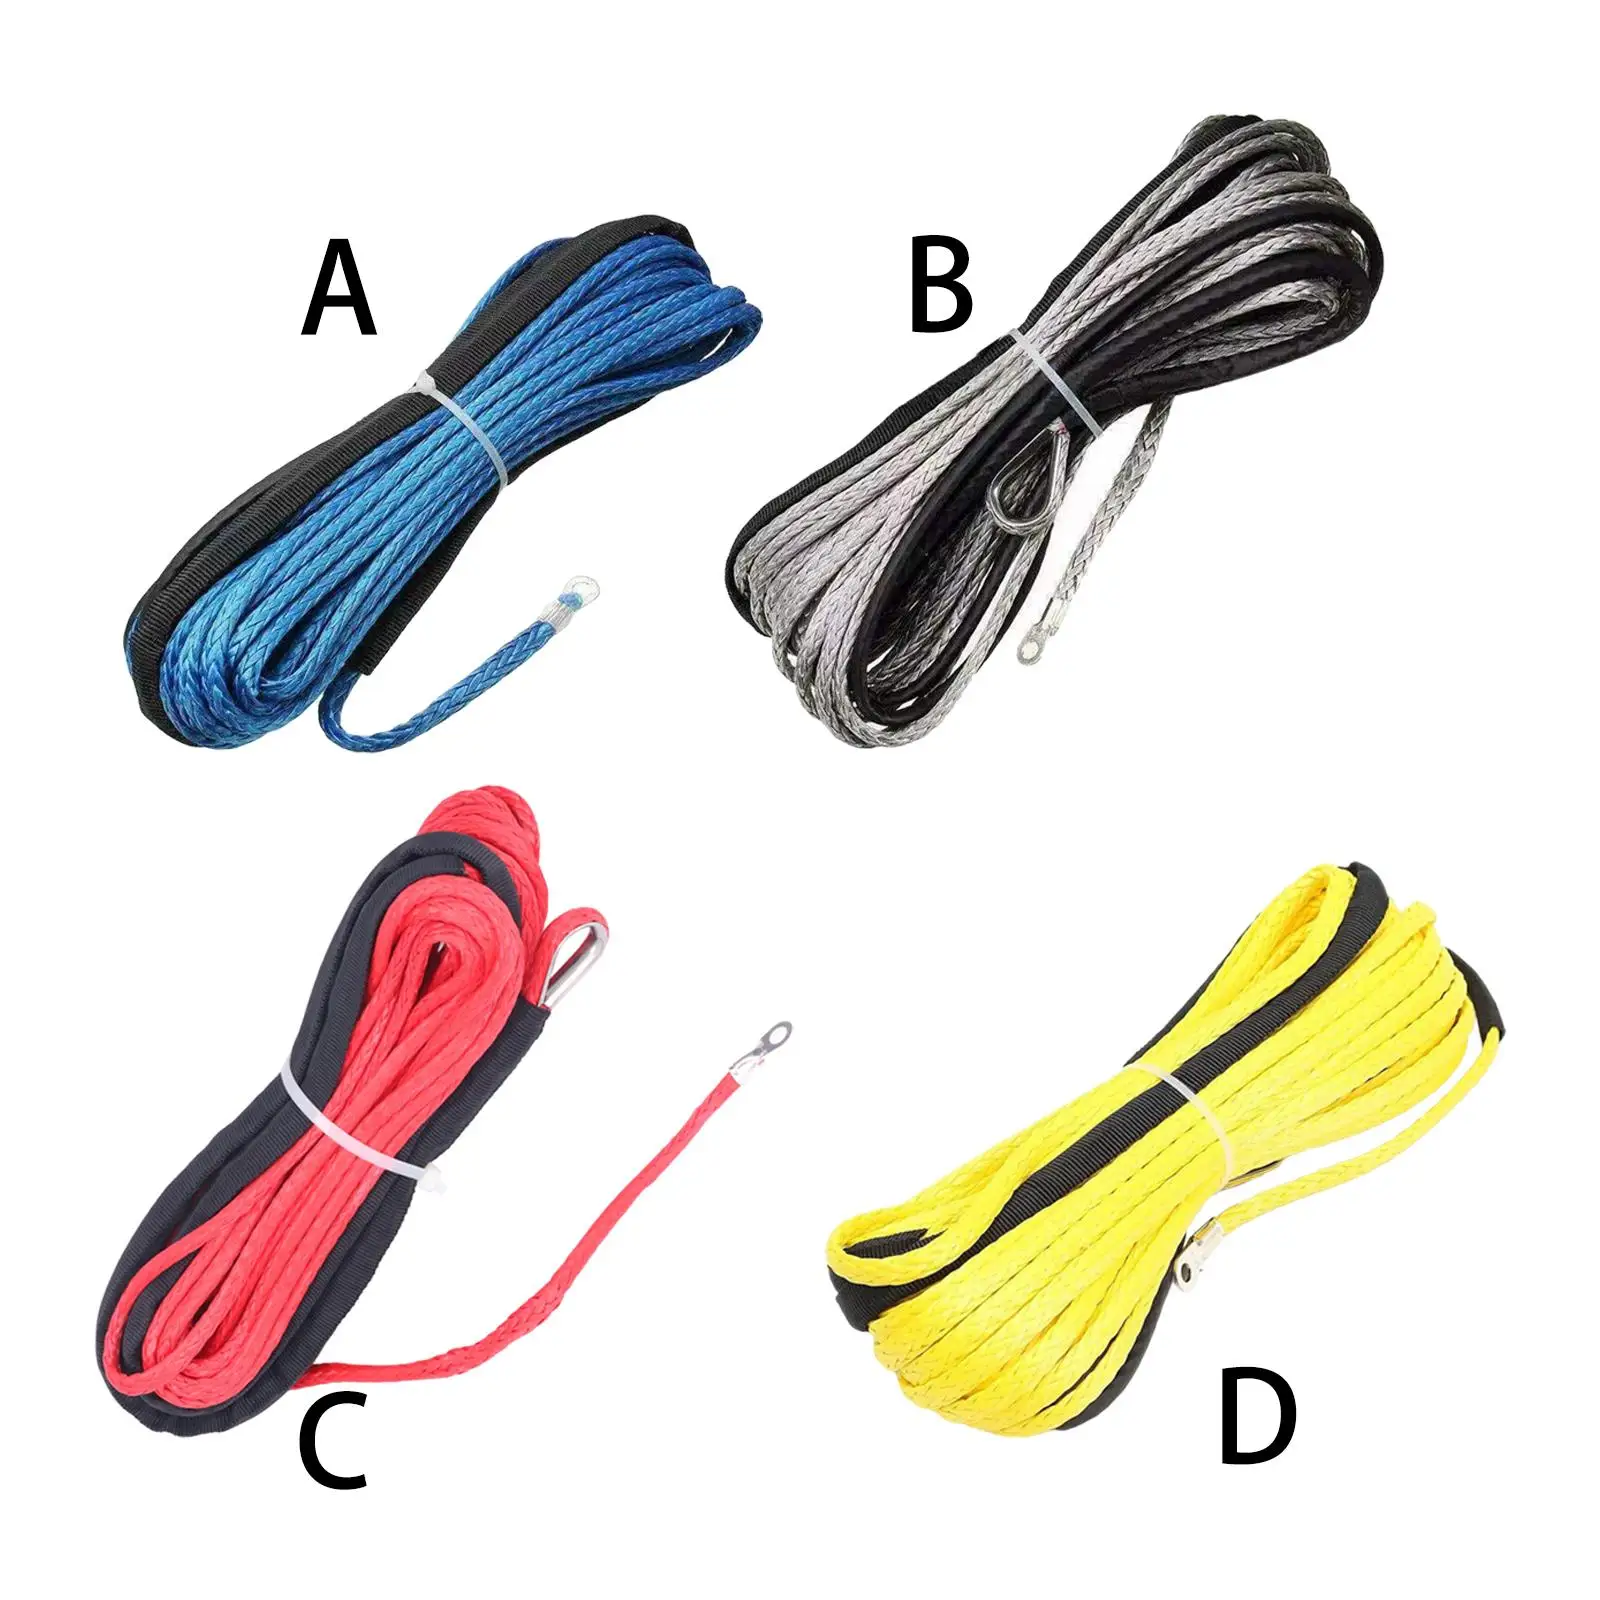 Synthetic Winch Rope 50` Universal Road  Rope  Vehicles Towing durable four.8mm Towing Winch Cable Cars UTV RV Boat Truck